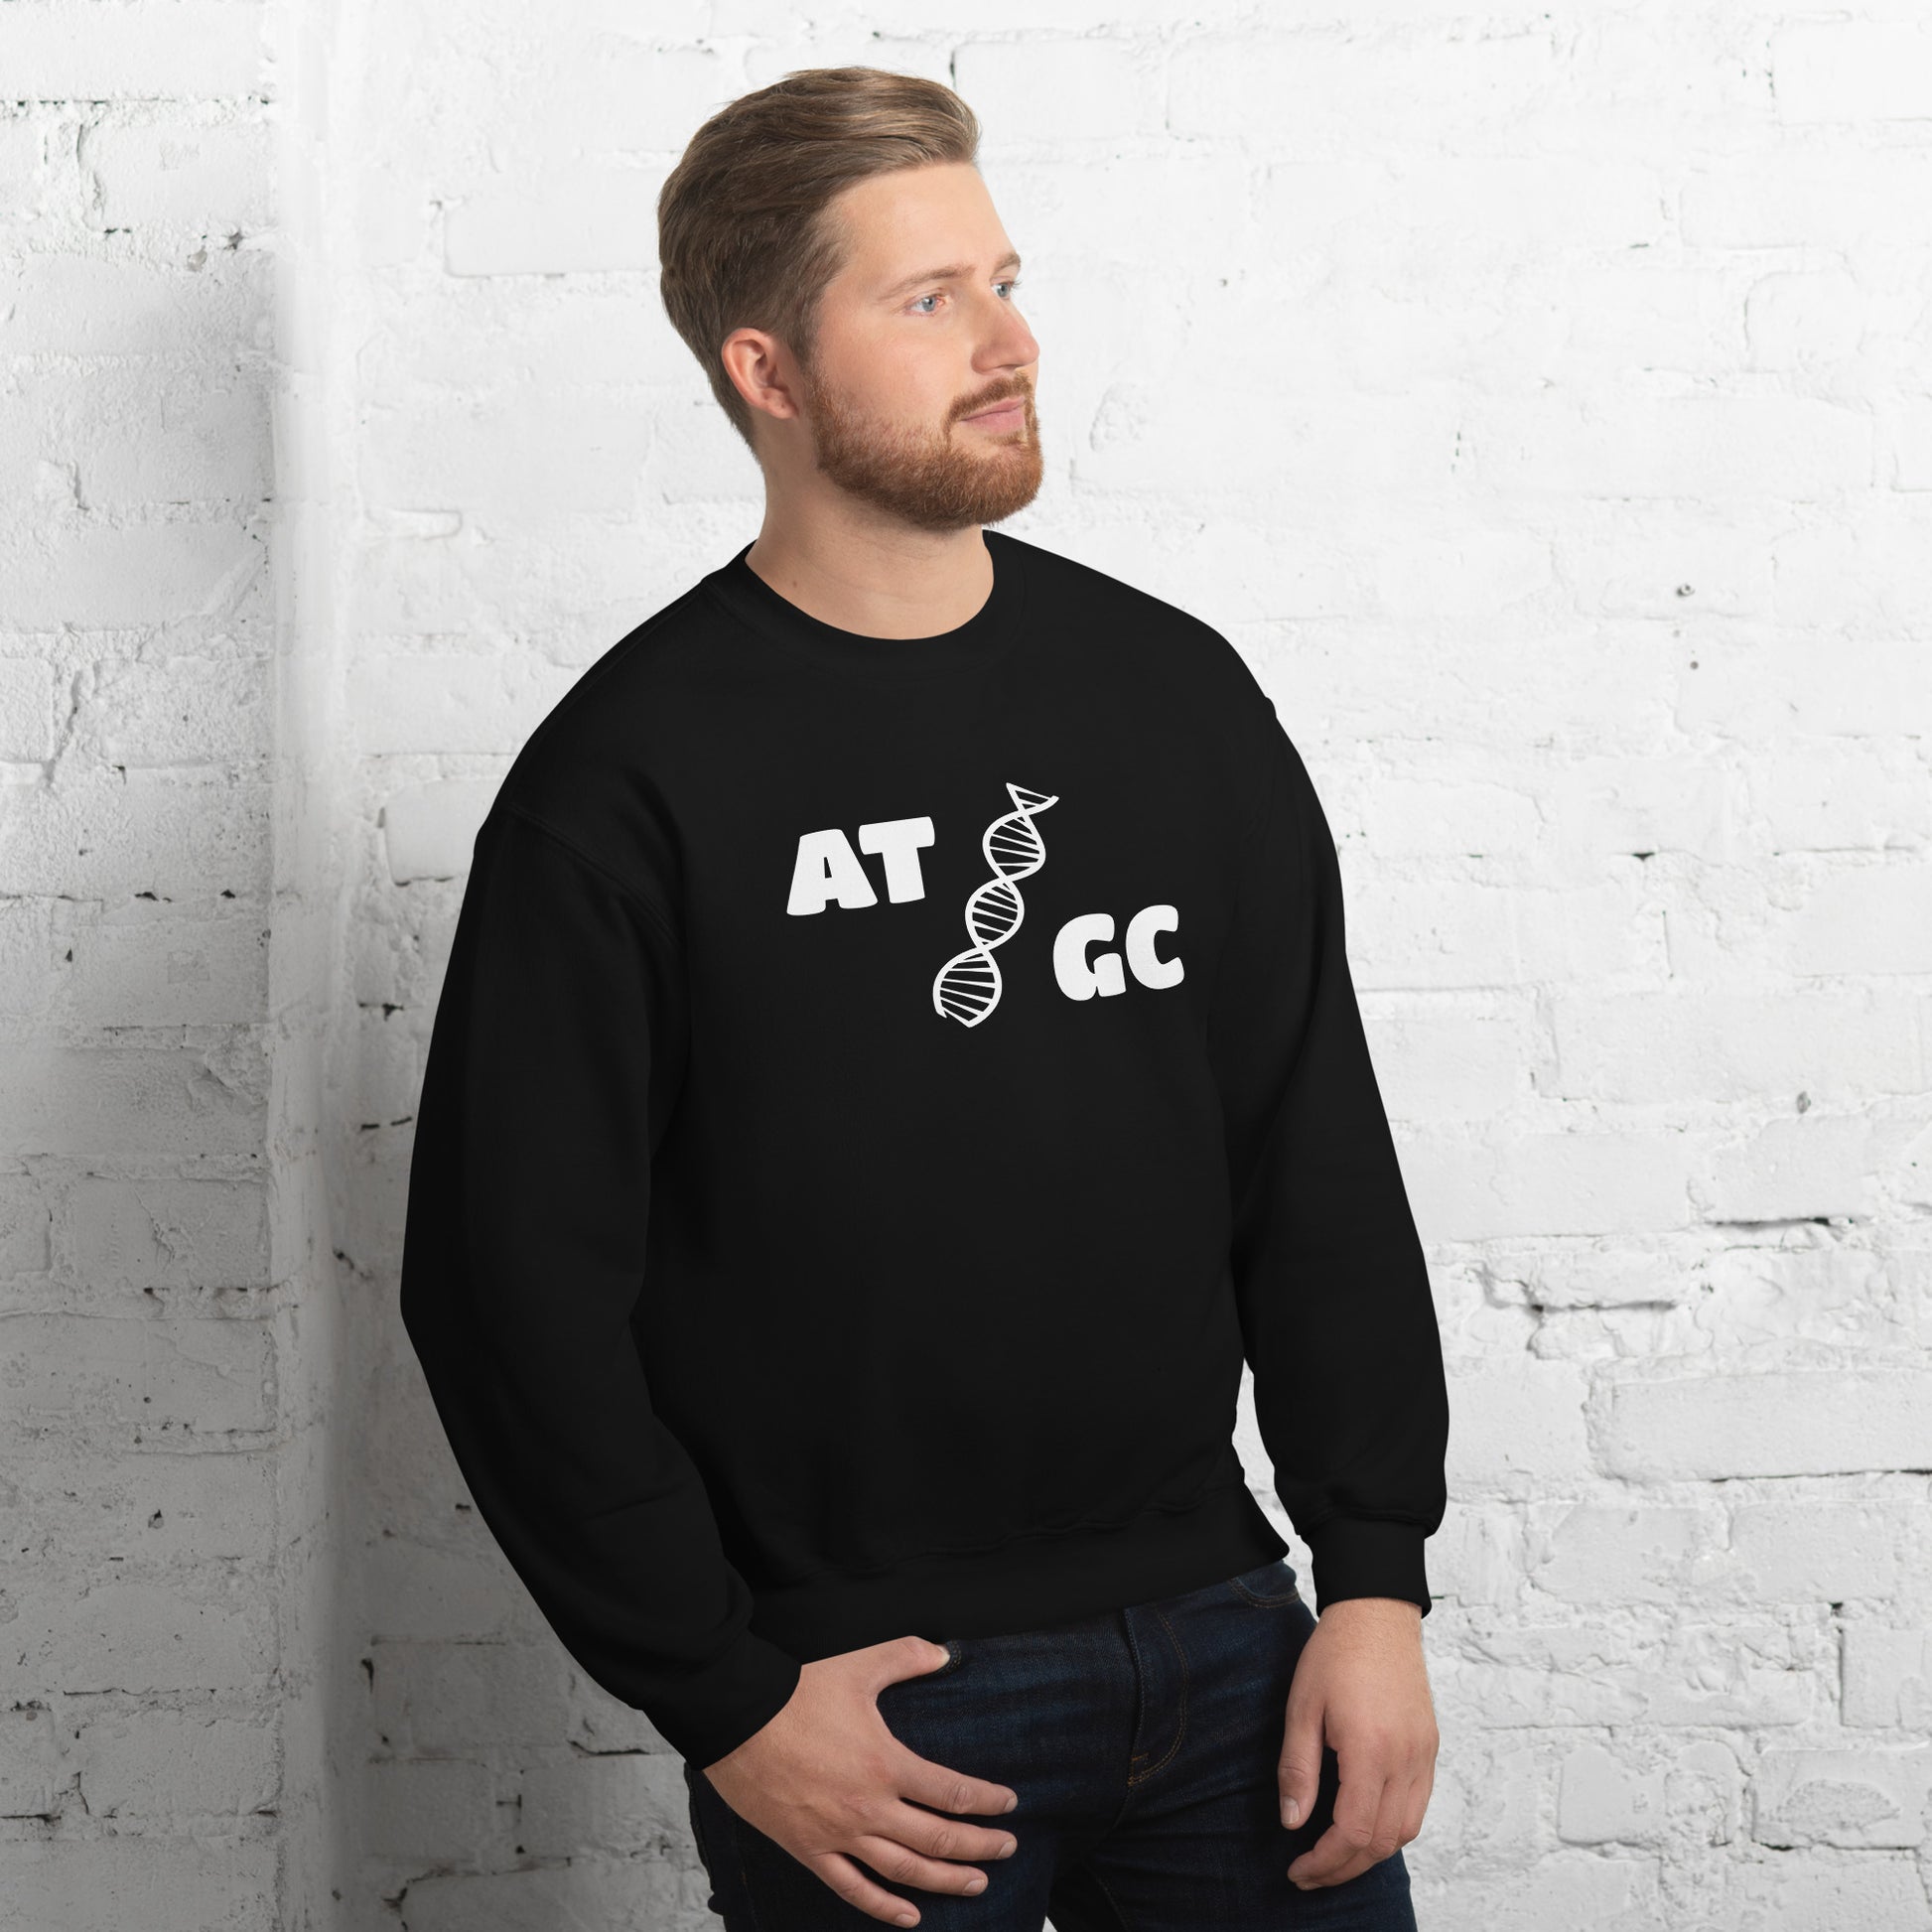 Men with black sweatshirt with image of a DNA string and the text "ATGC"